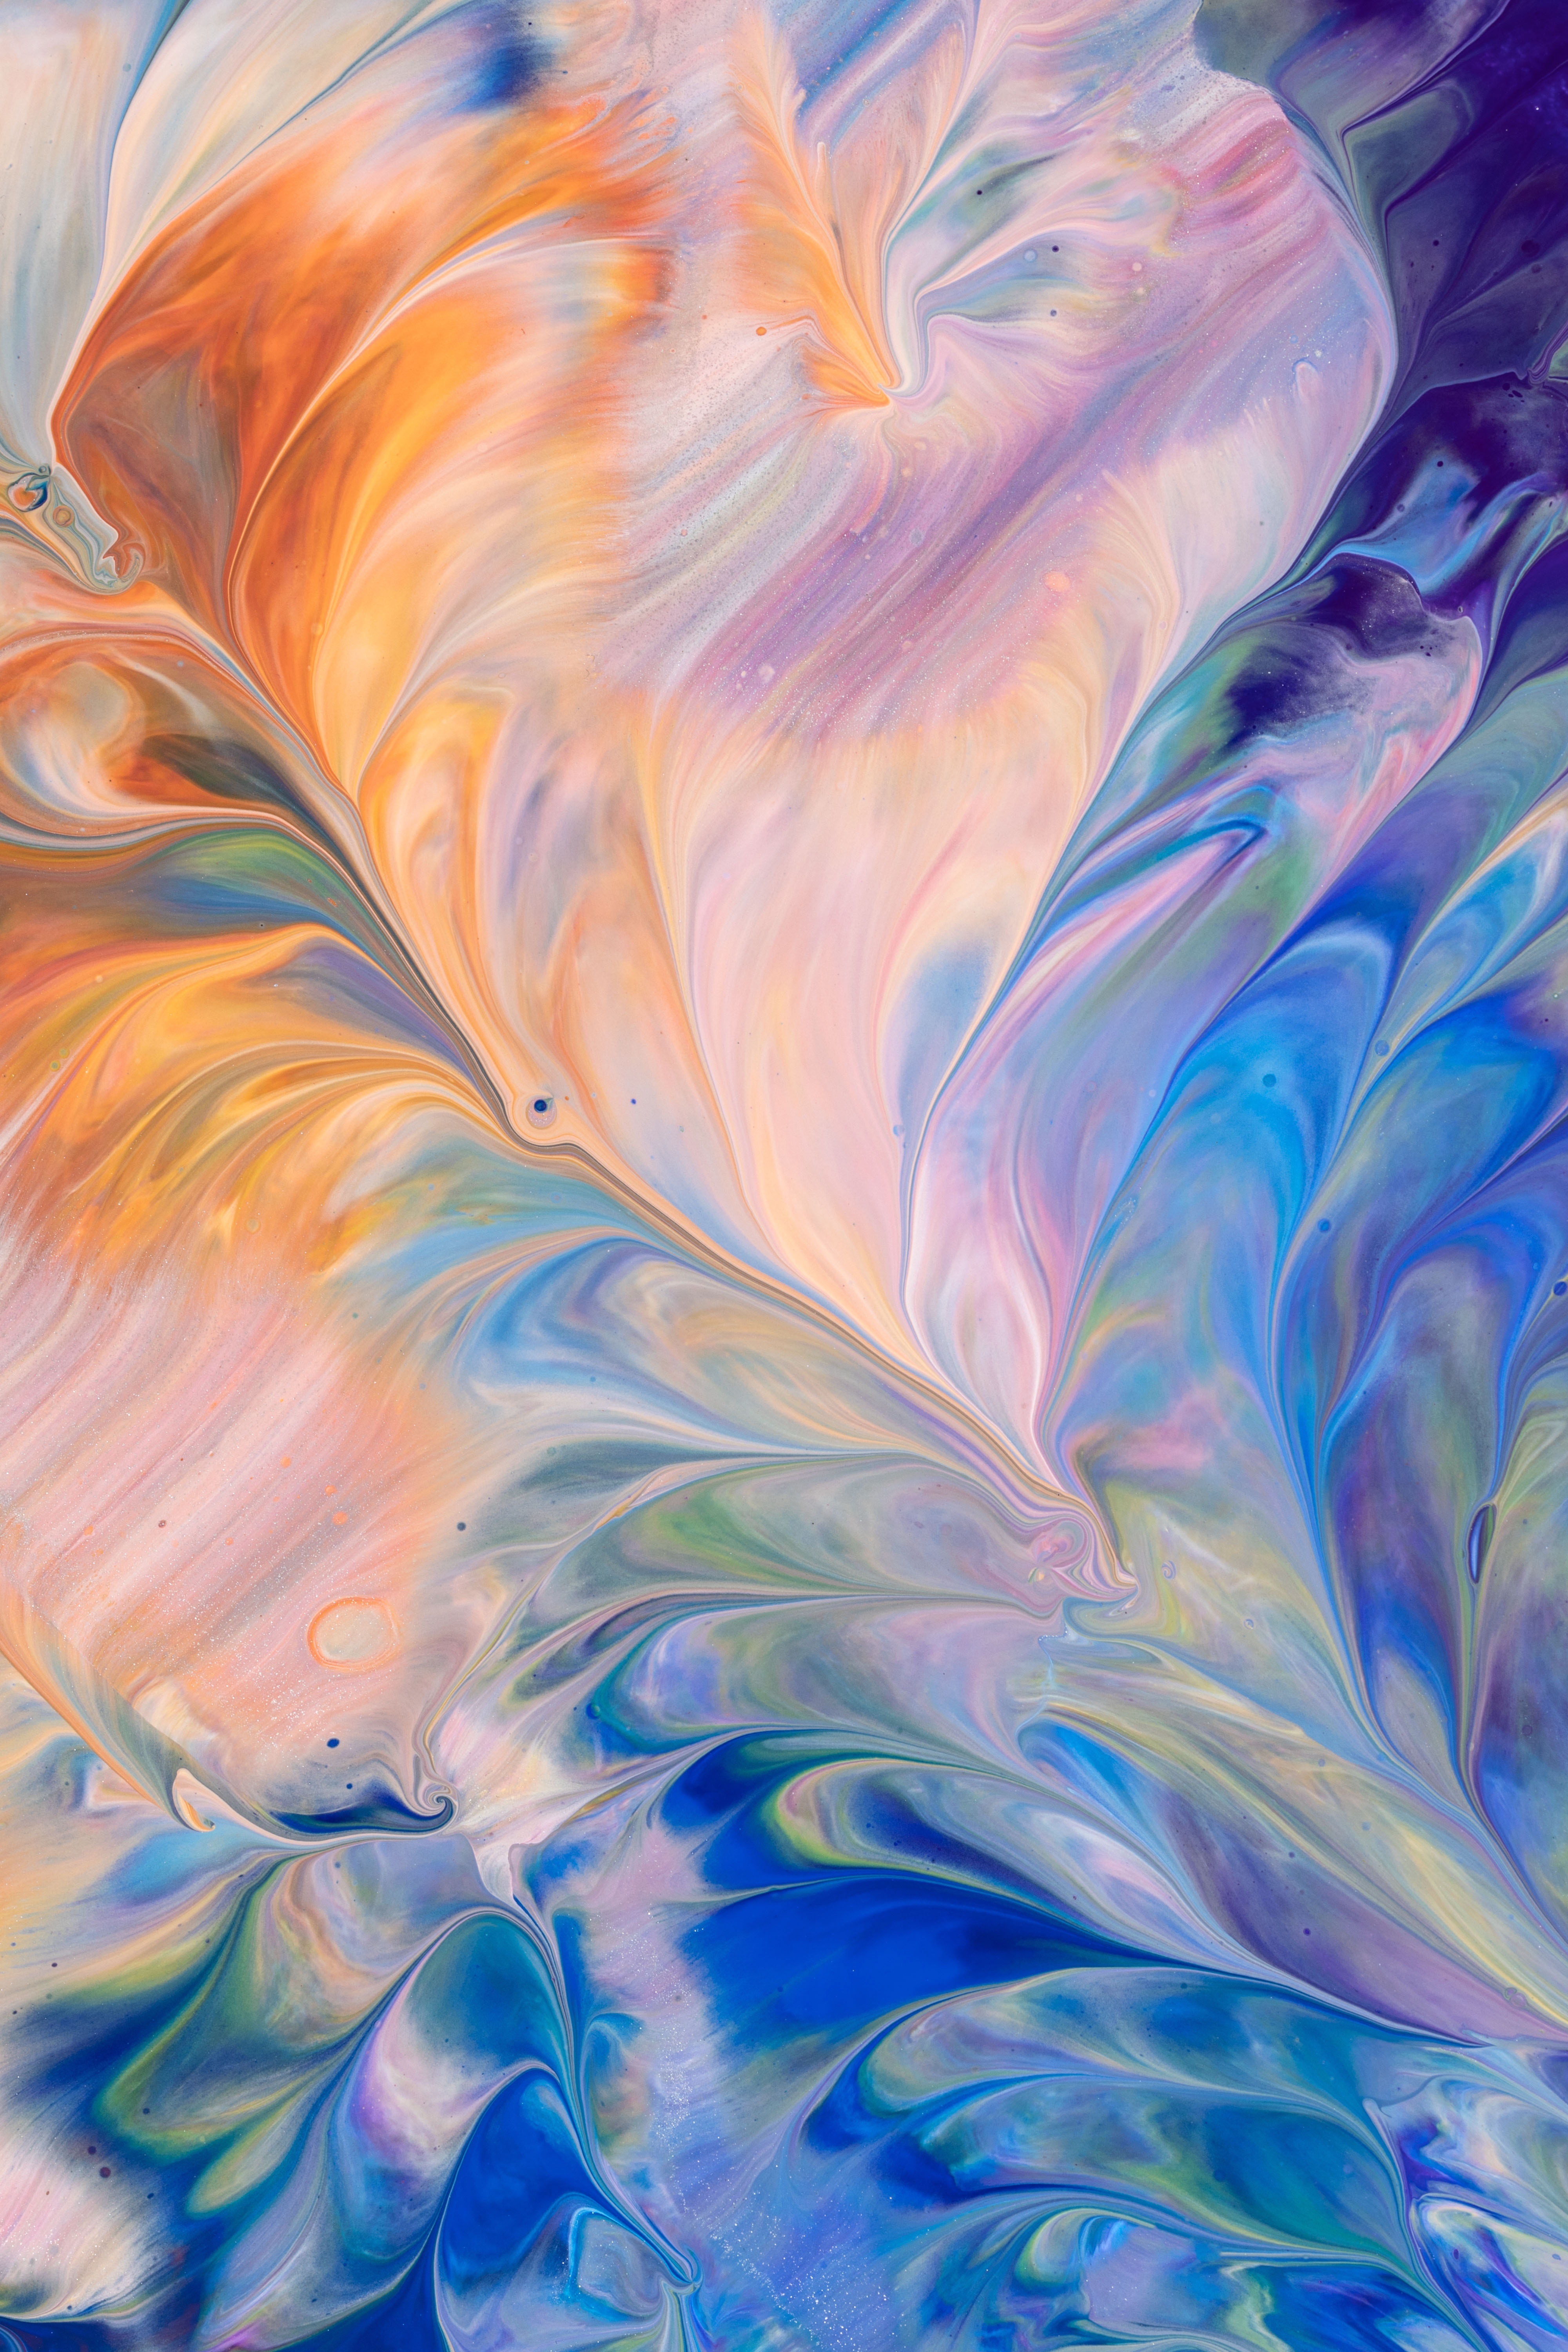 Phone Background Full HD spots, abstract, paint, divorces